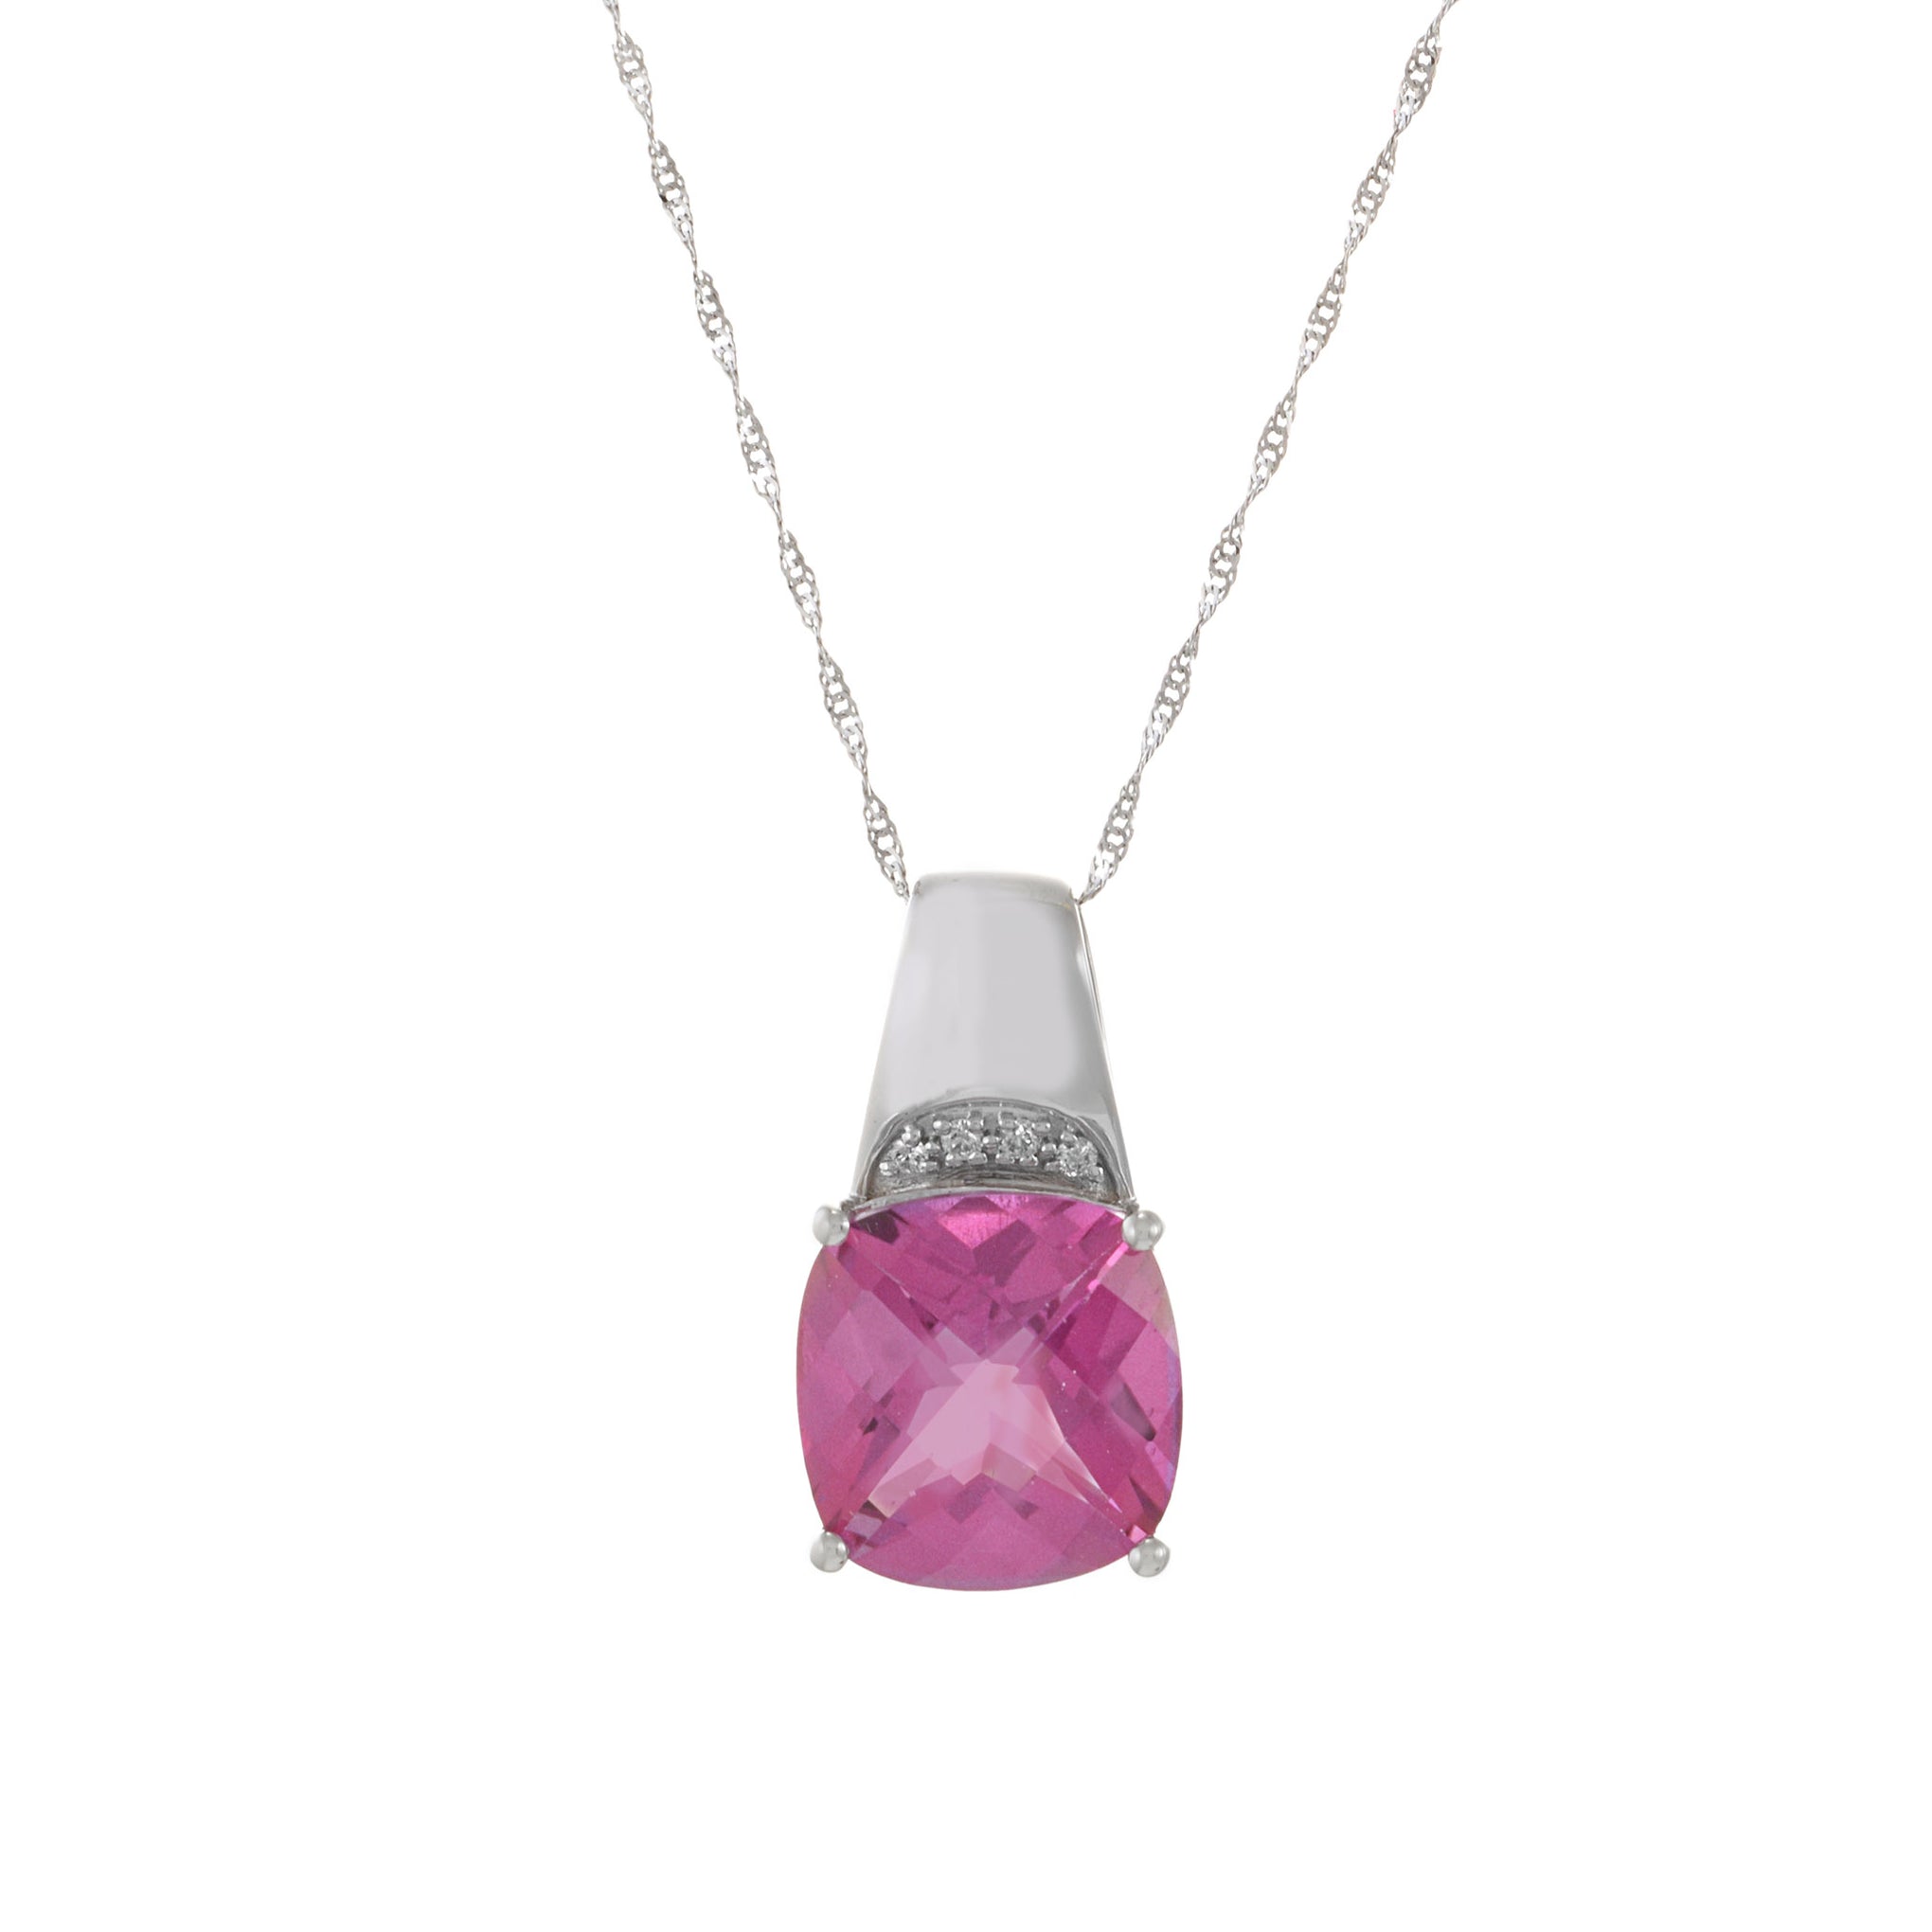 18KT White Gold Pink Topaz And Diamond Pendant Necklace